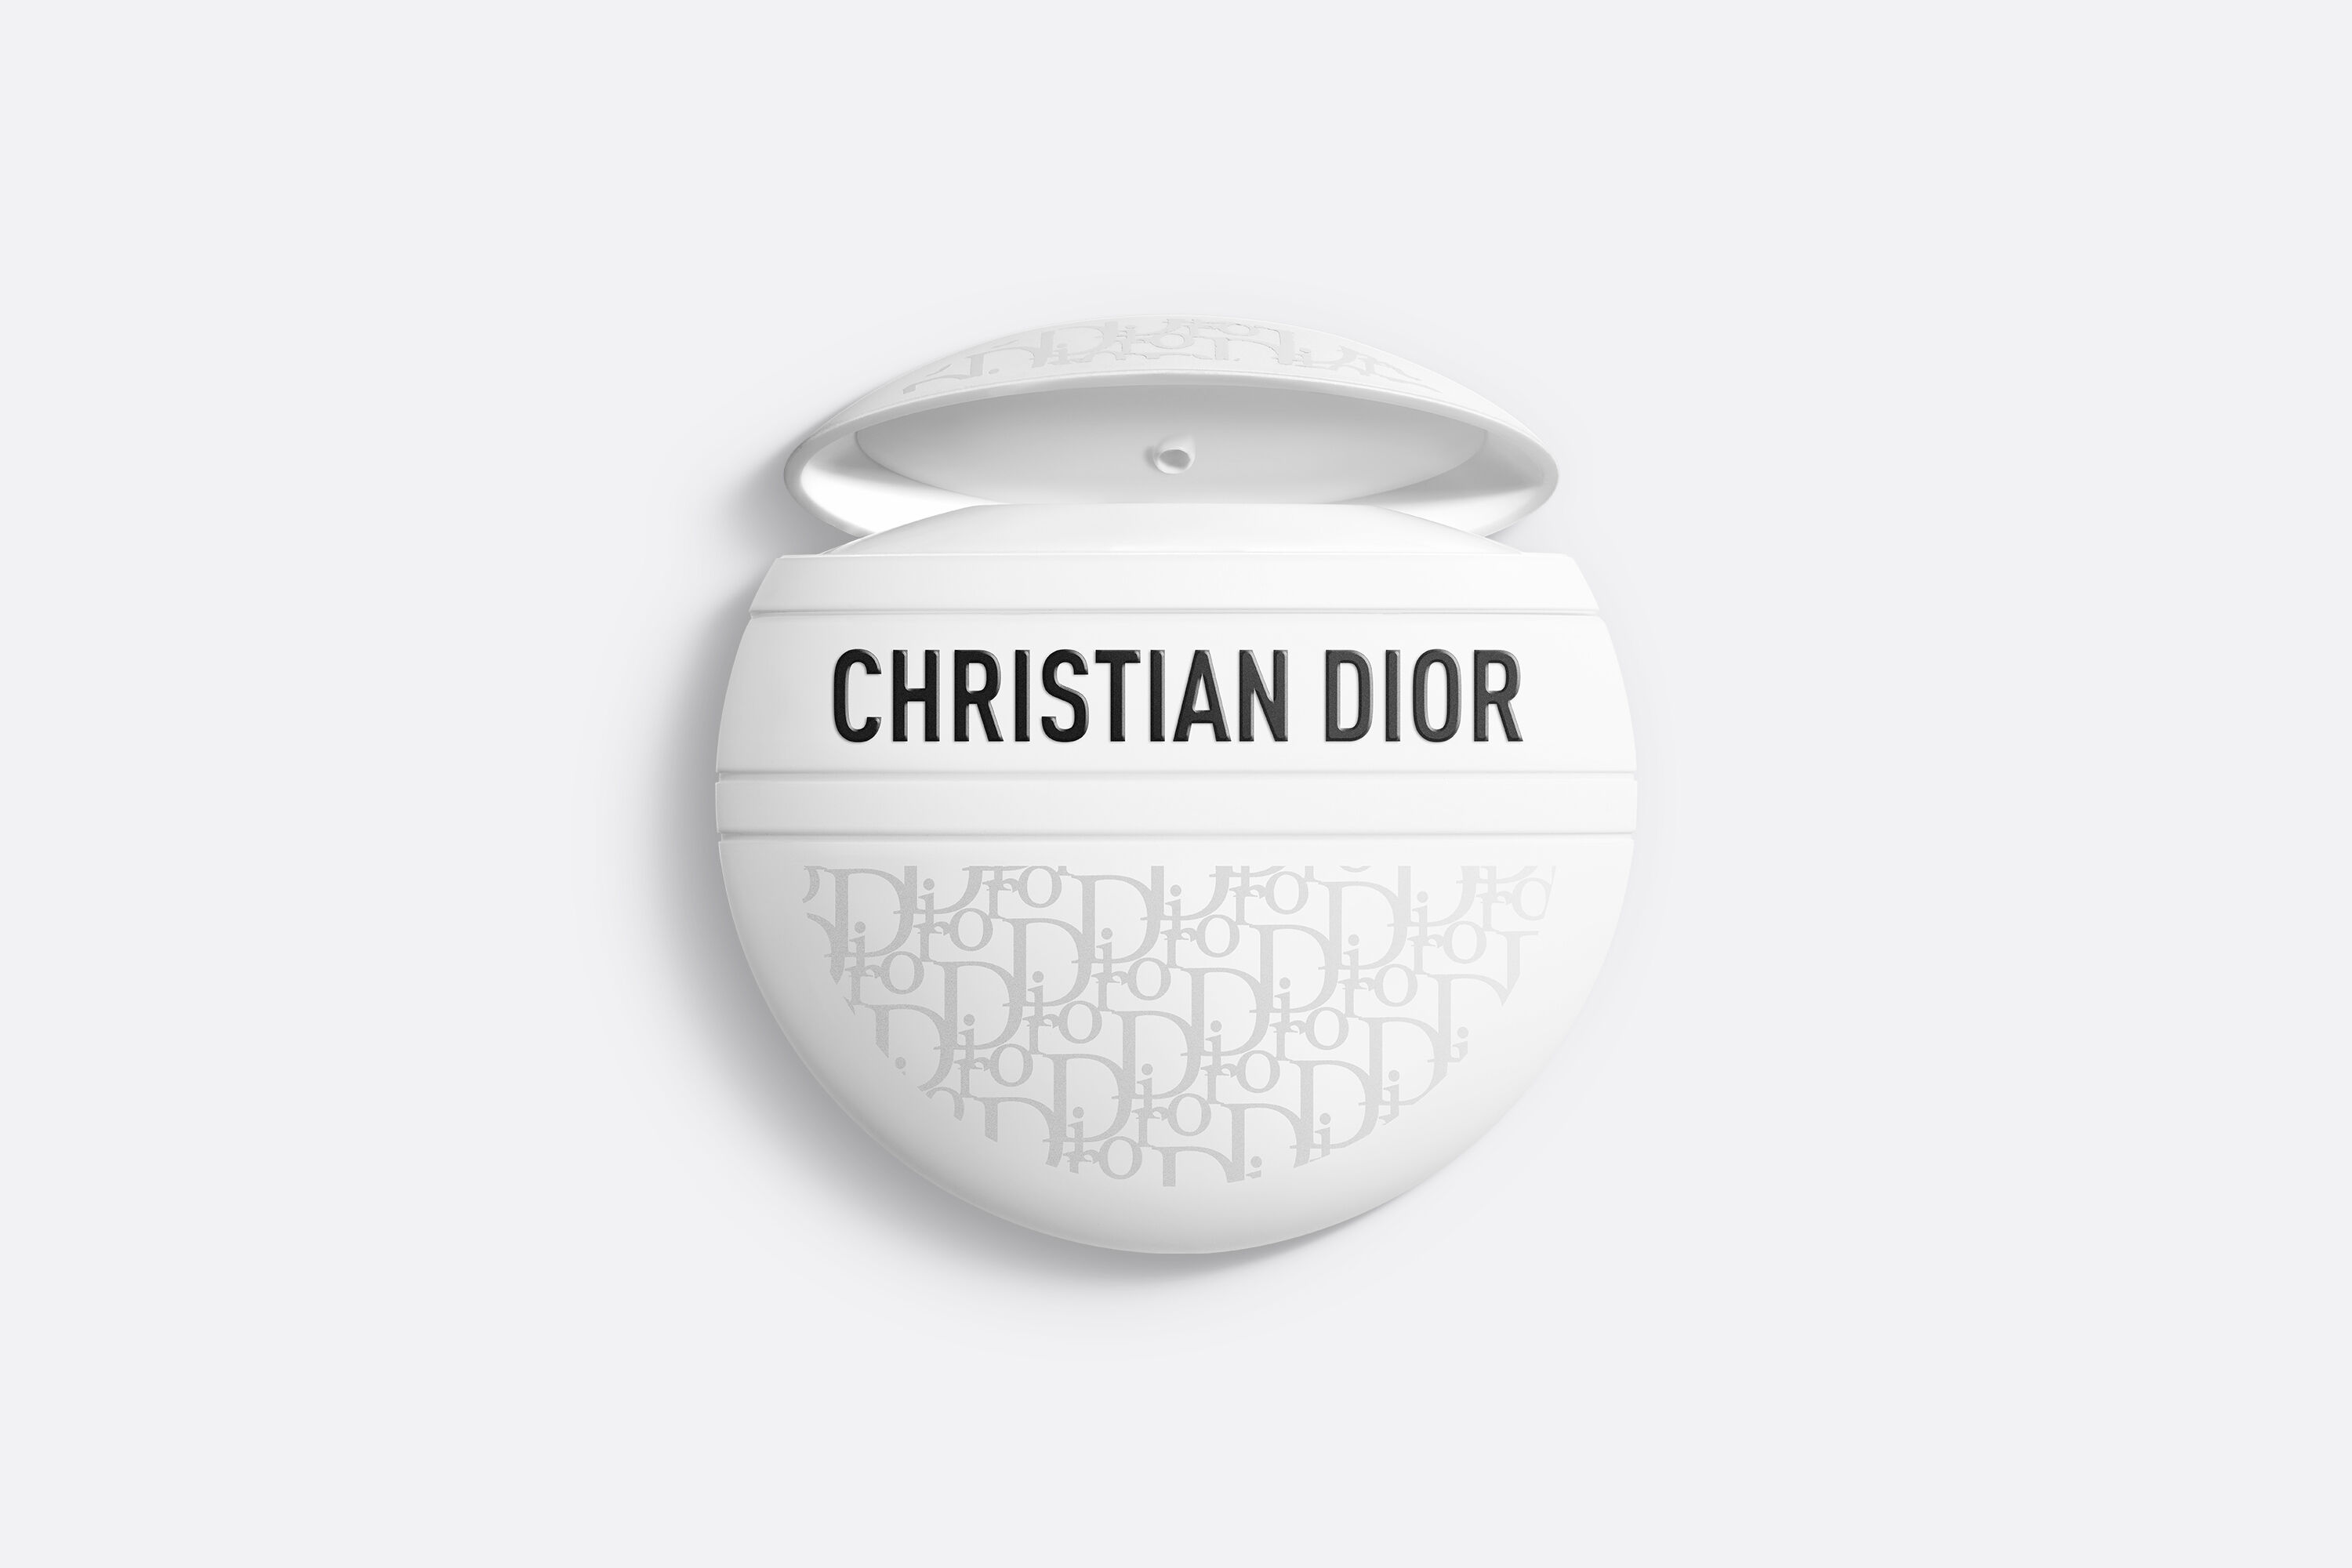 Dior Logo  Free Name Design Tool from Flaming Text